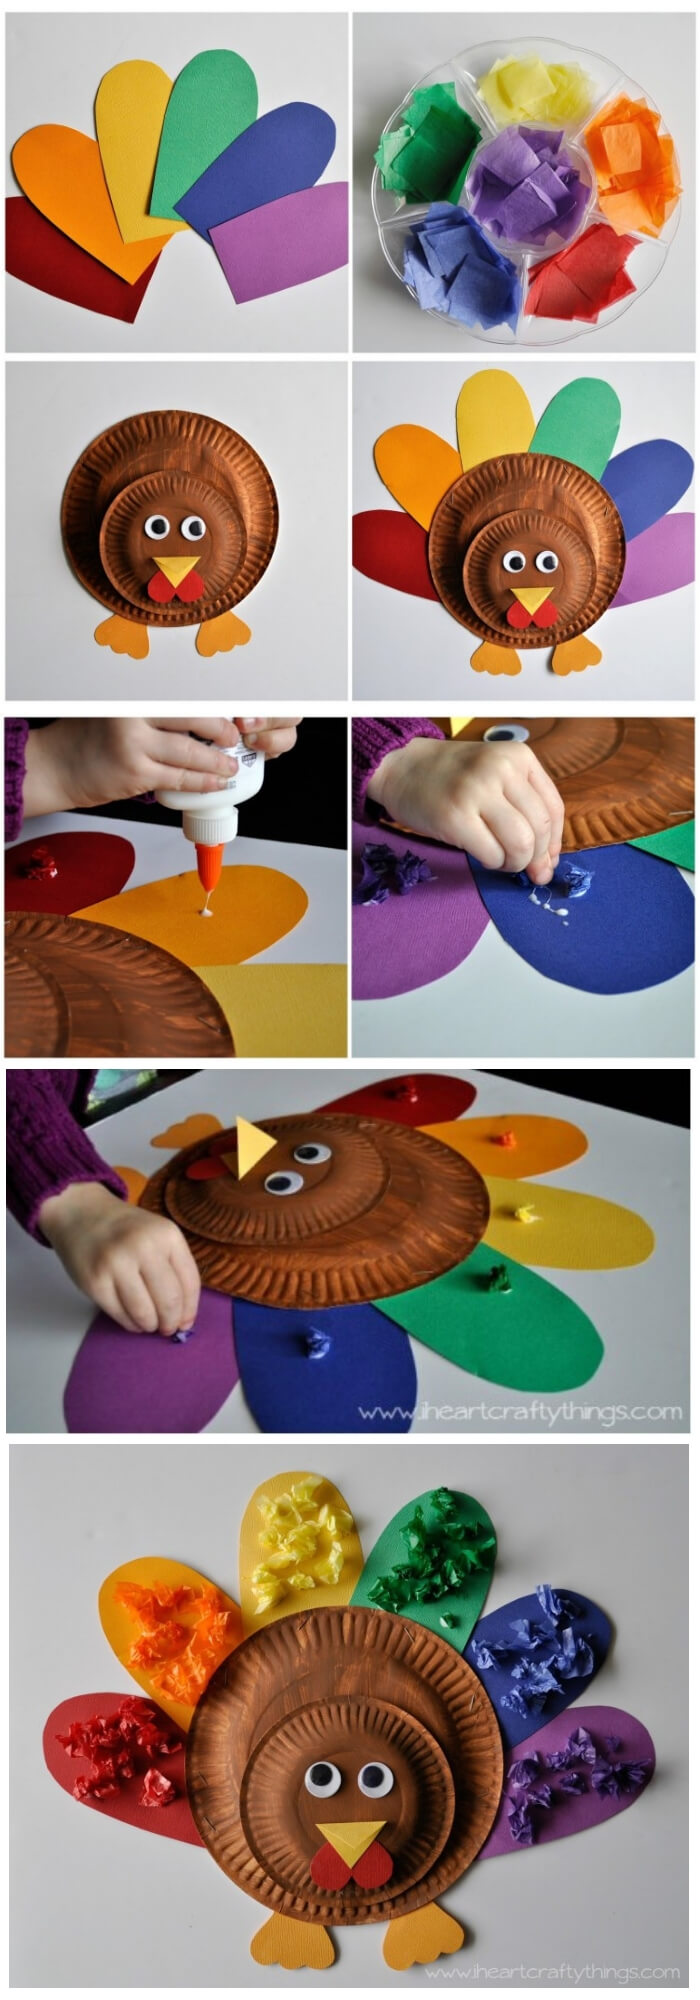 Cute and colorful kids turkey craft | Simple Ideas for Kids' Crafts for Thanksgiving - FarmFoodFamily.com